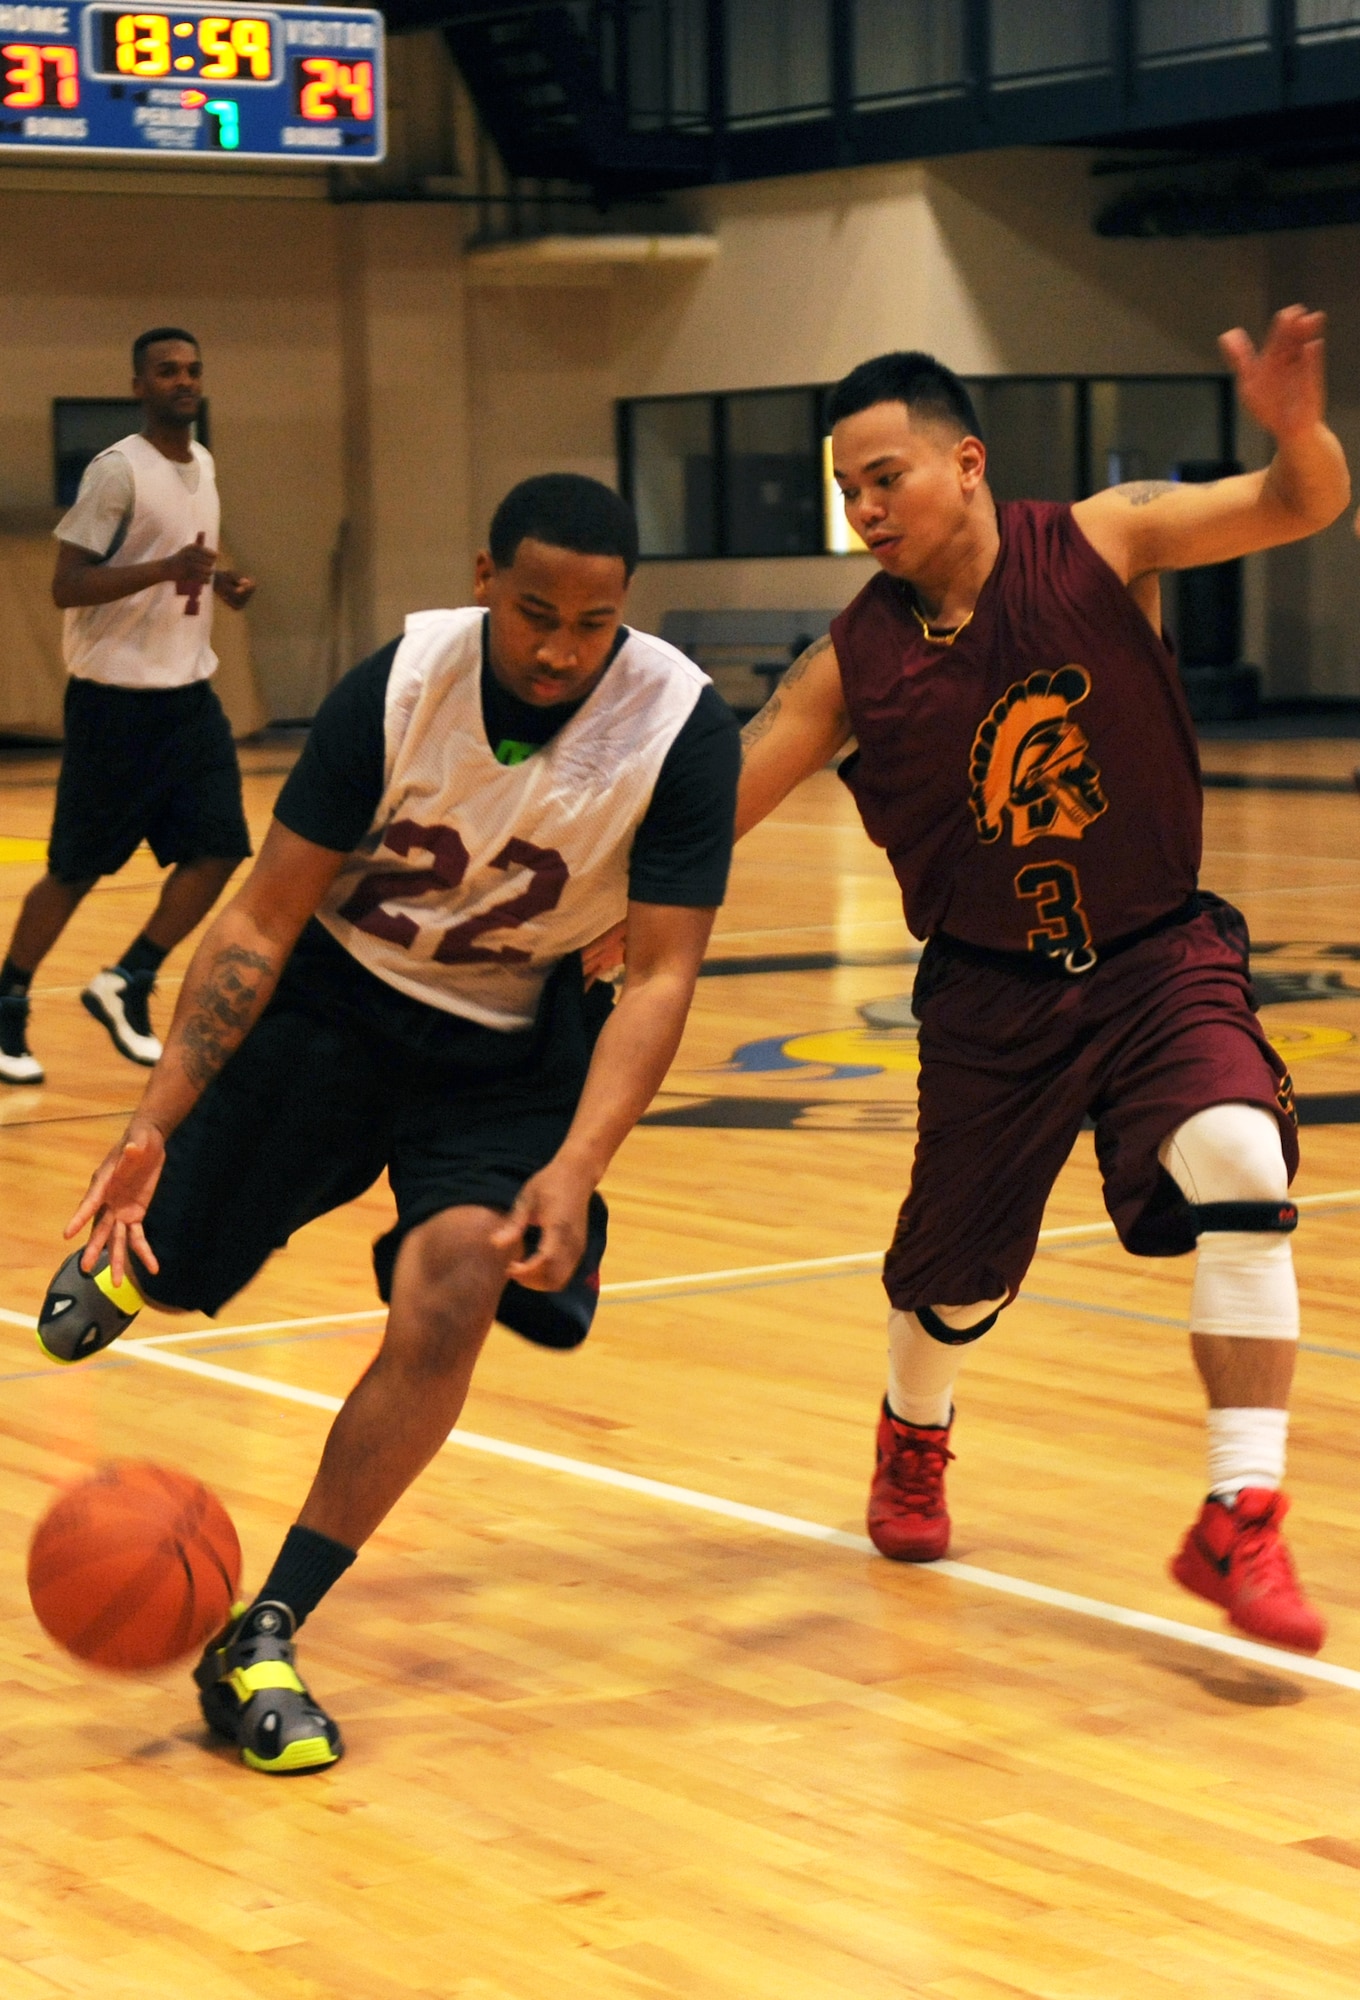 Senior Airman Peter Elefante, a 19th Medical Group Team 1 player, guards Staff Sgt. David Lea, a 19th Logistics Readiness Squadron Team 1 player, Jan. 5, 2015, at Little Rock Air Force Base, Ark. This was the first game of the pre-season intramural basketball .  (U.S. Air Force photo by Senior Airman Stephanie Serrano)